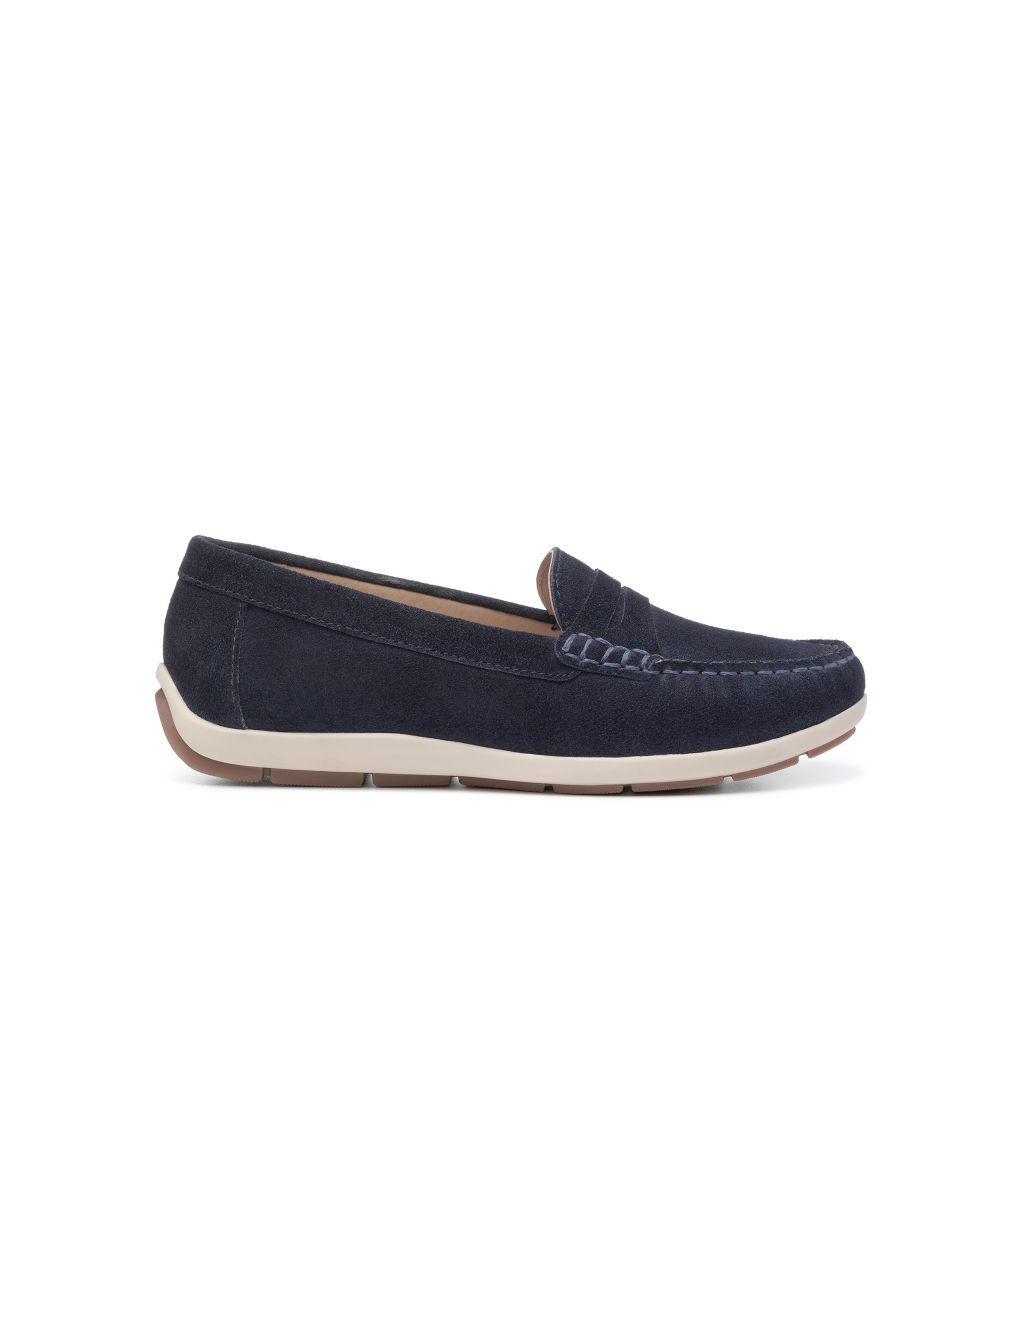 Pier Suede Flat Loafers image 1